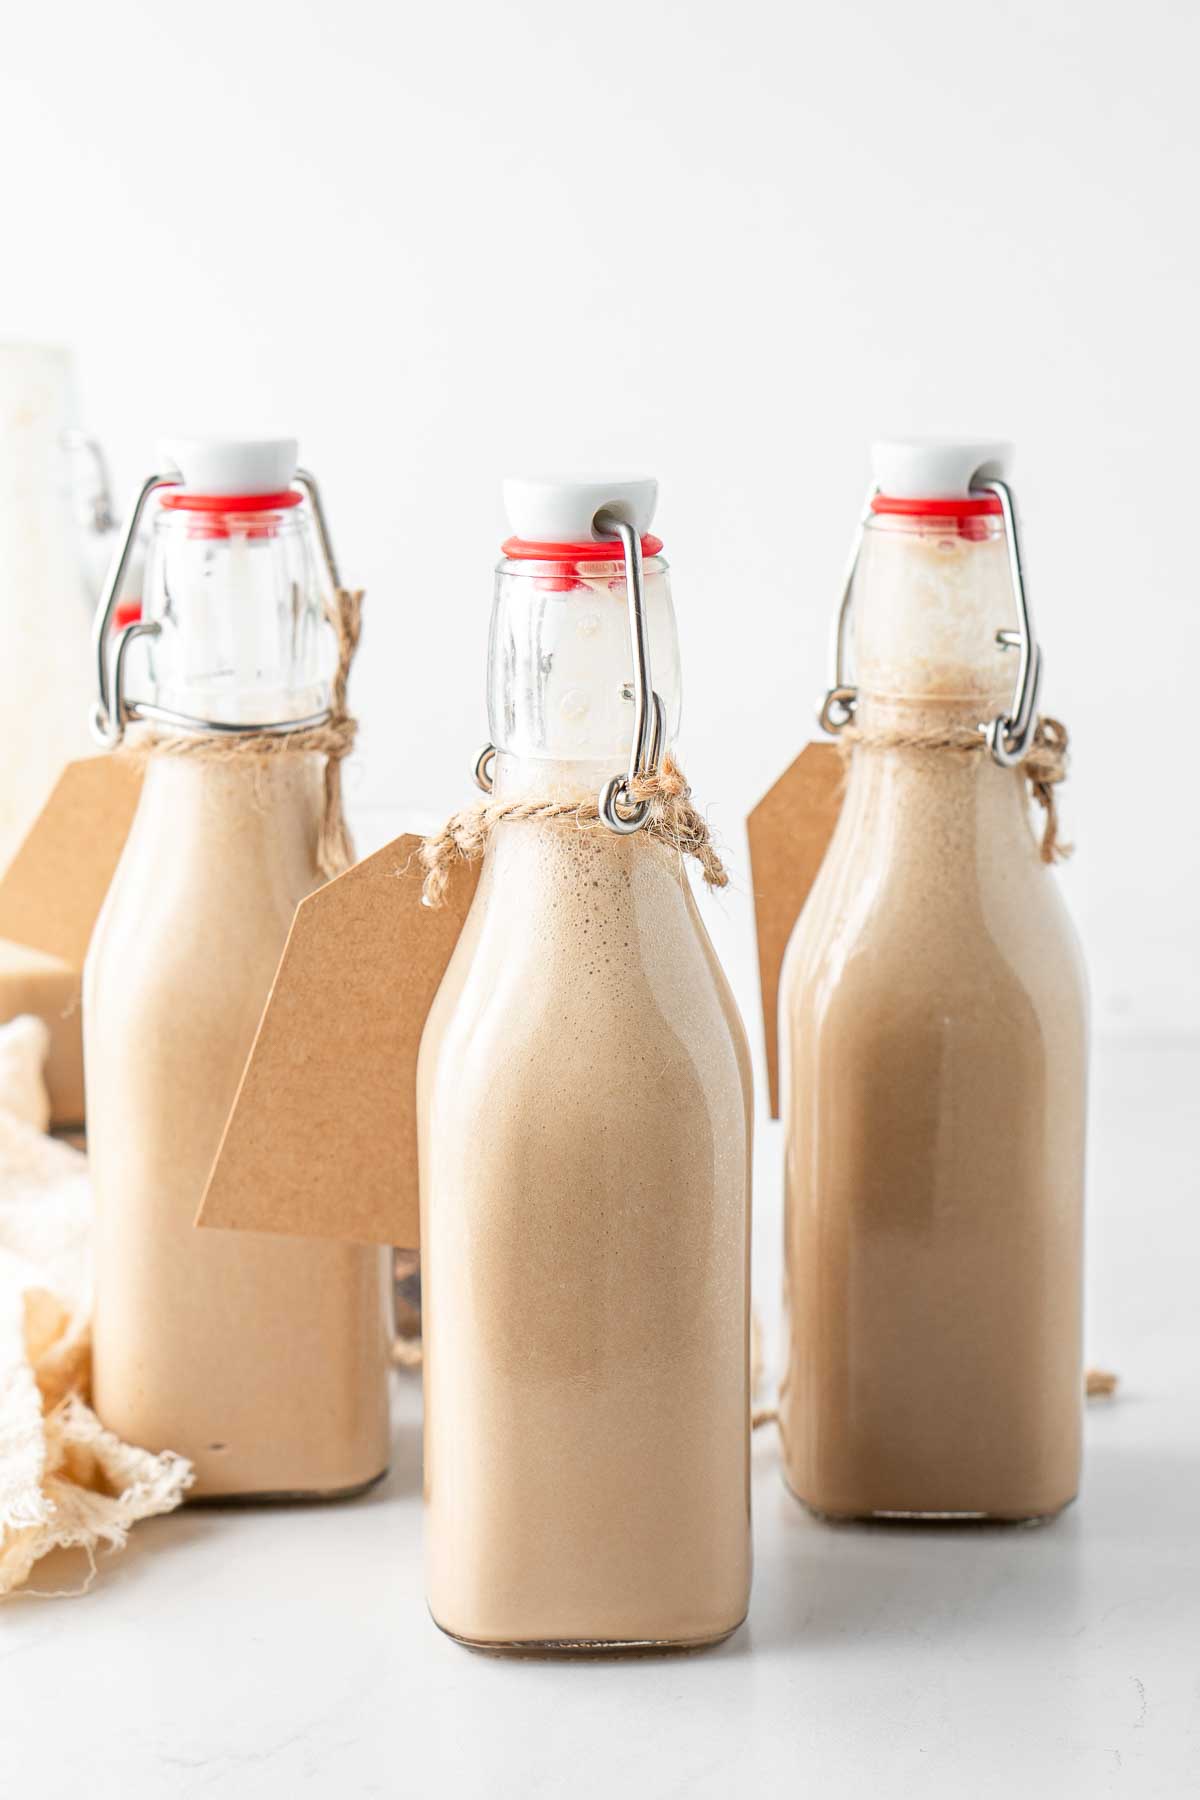 Three bottles of homemade baileys with gift tags.